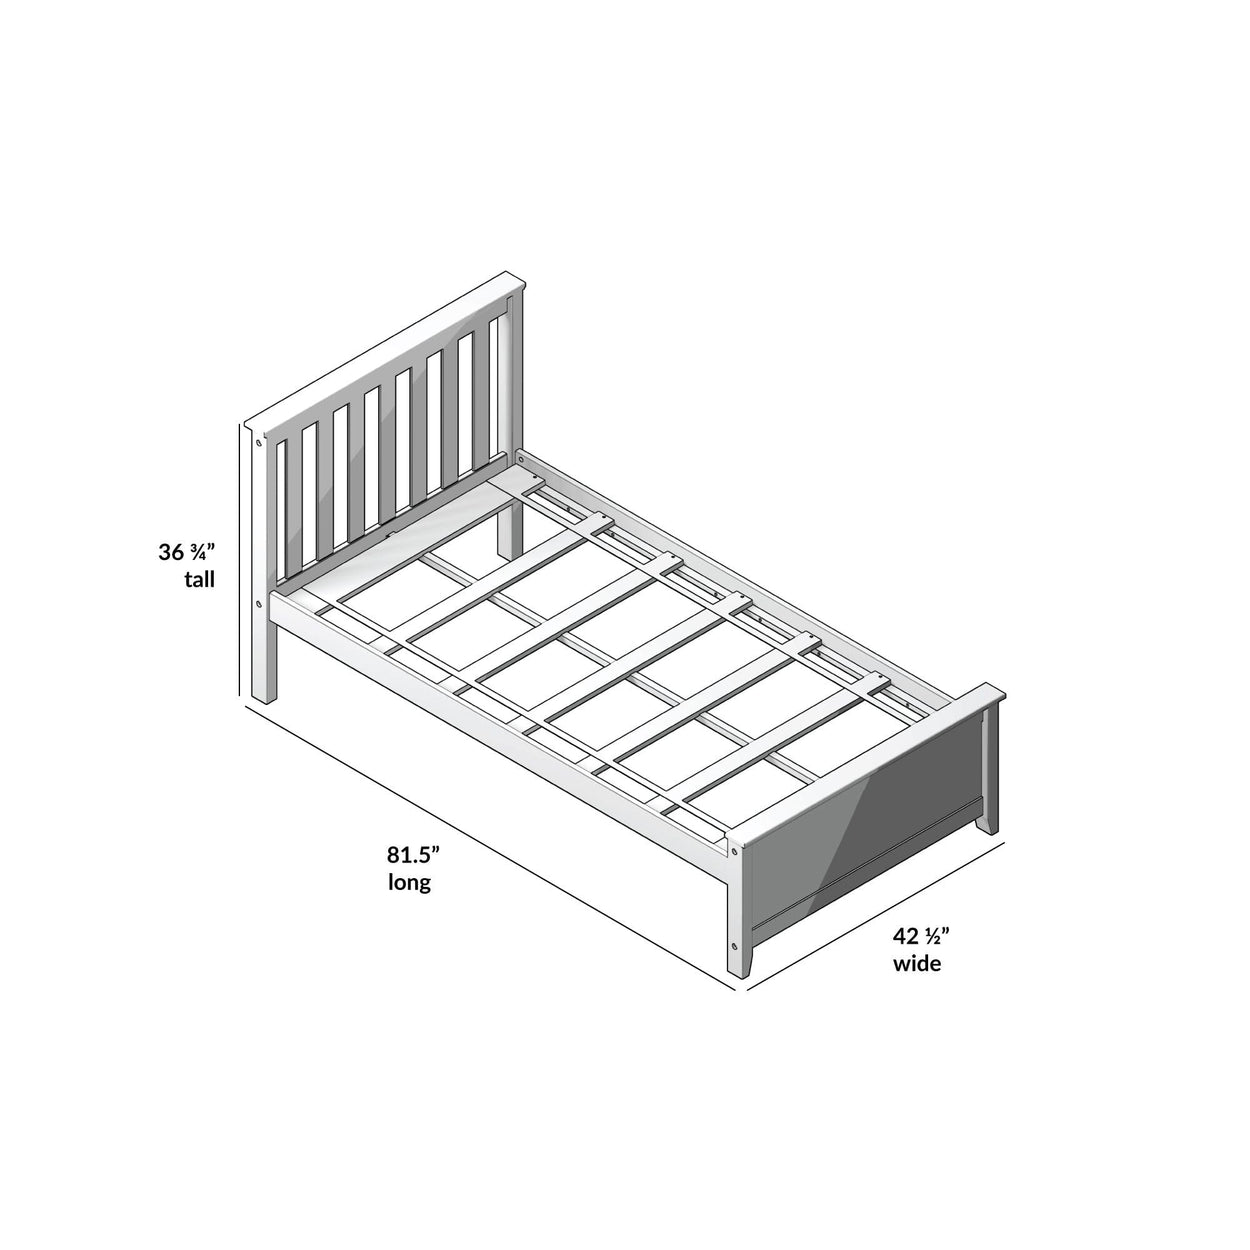 180210131109 : Kids Beds Twin Bed with Single Guard Rail, Blue